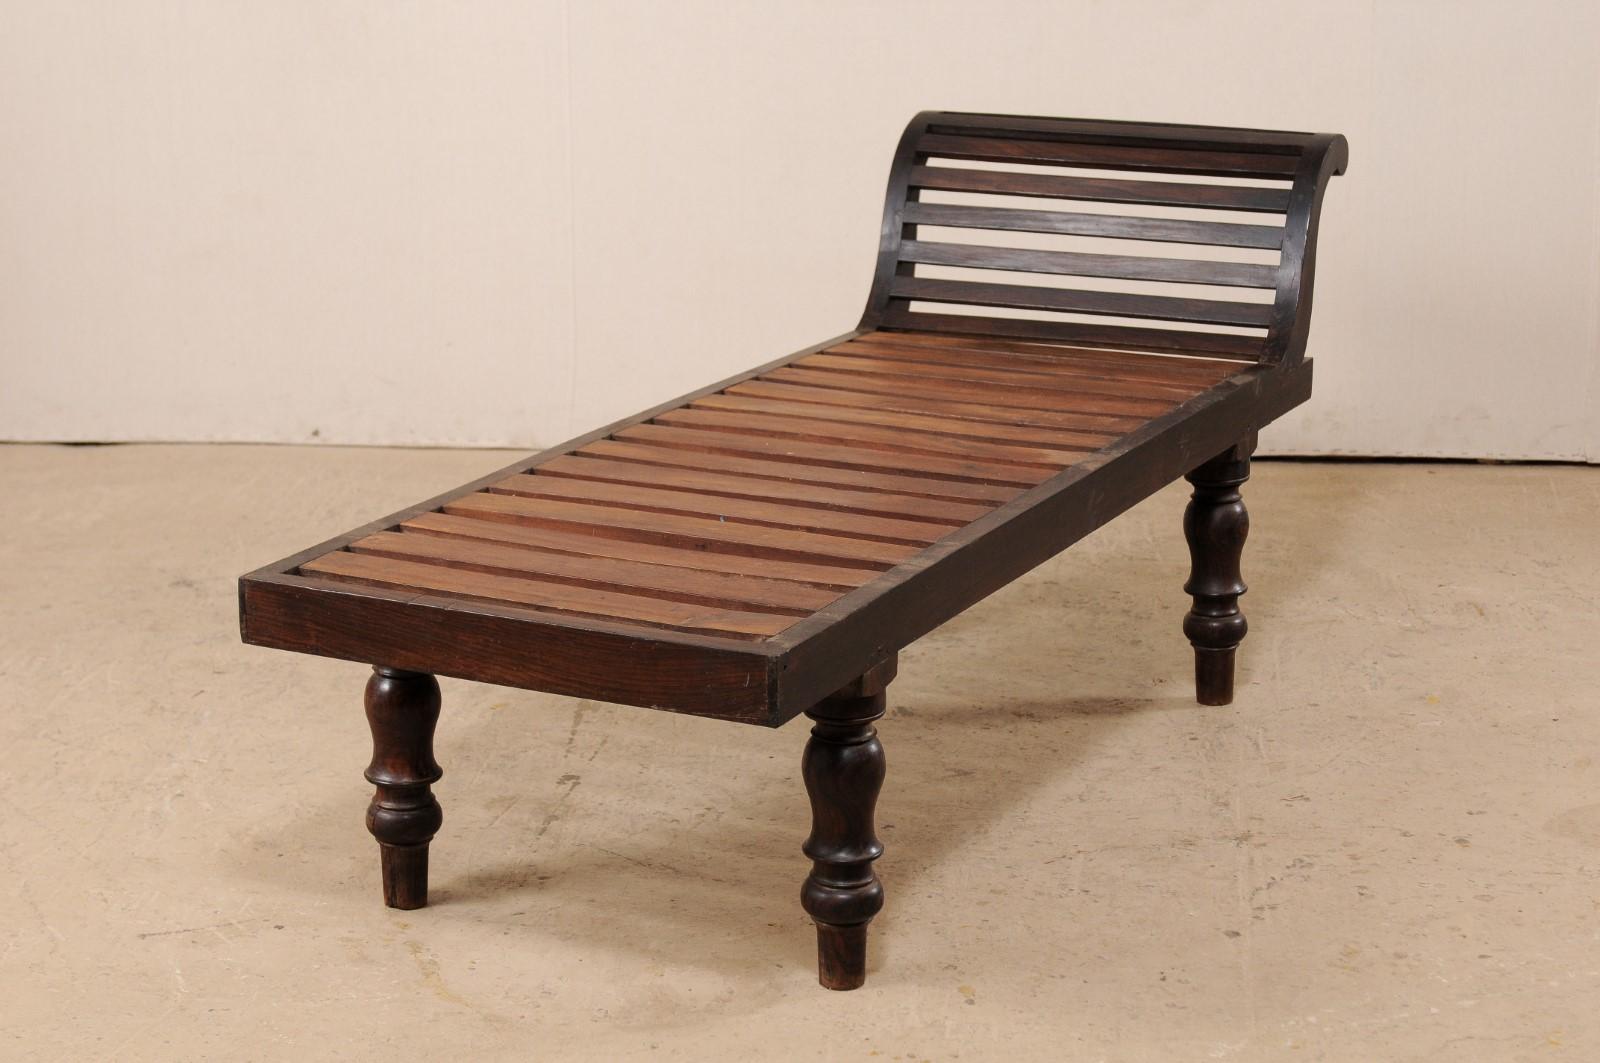 Carved Mid-20th Century British Colonial Wood Chaise Lounge Chair